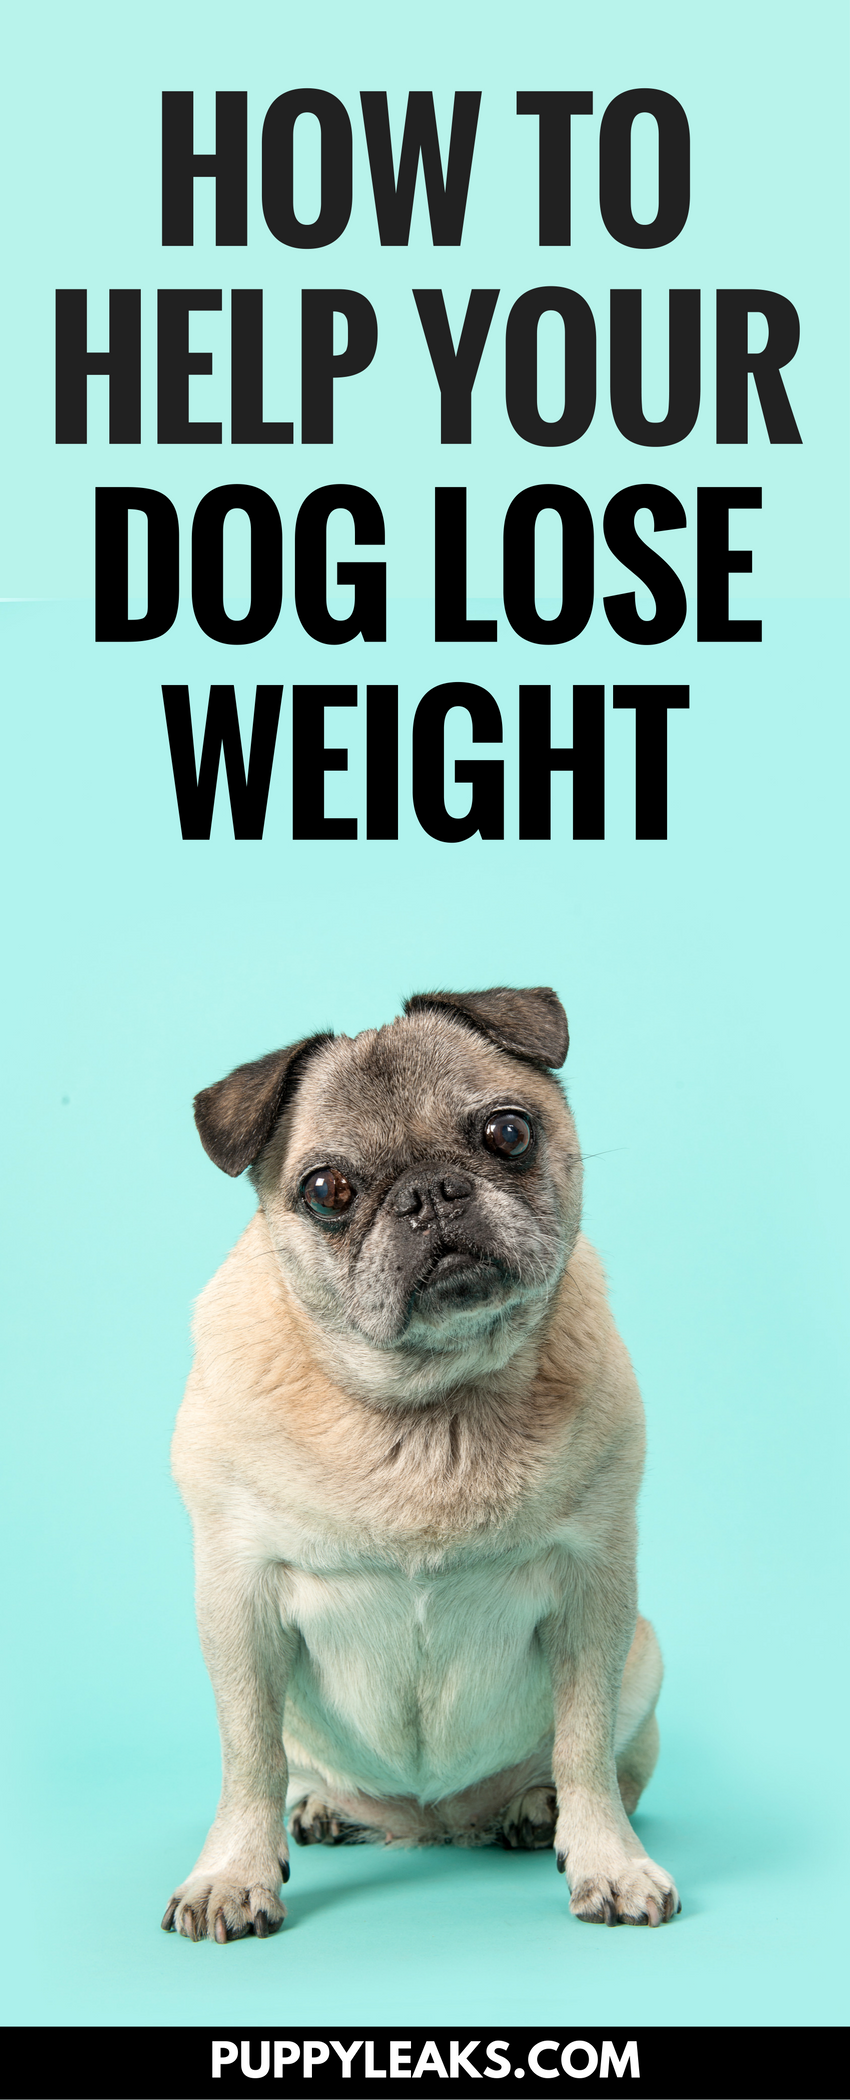 How to help your dog lose weight